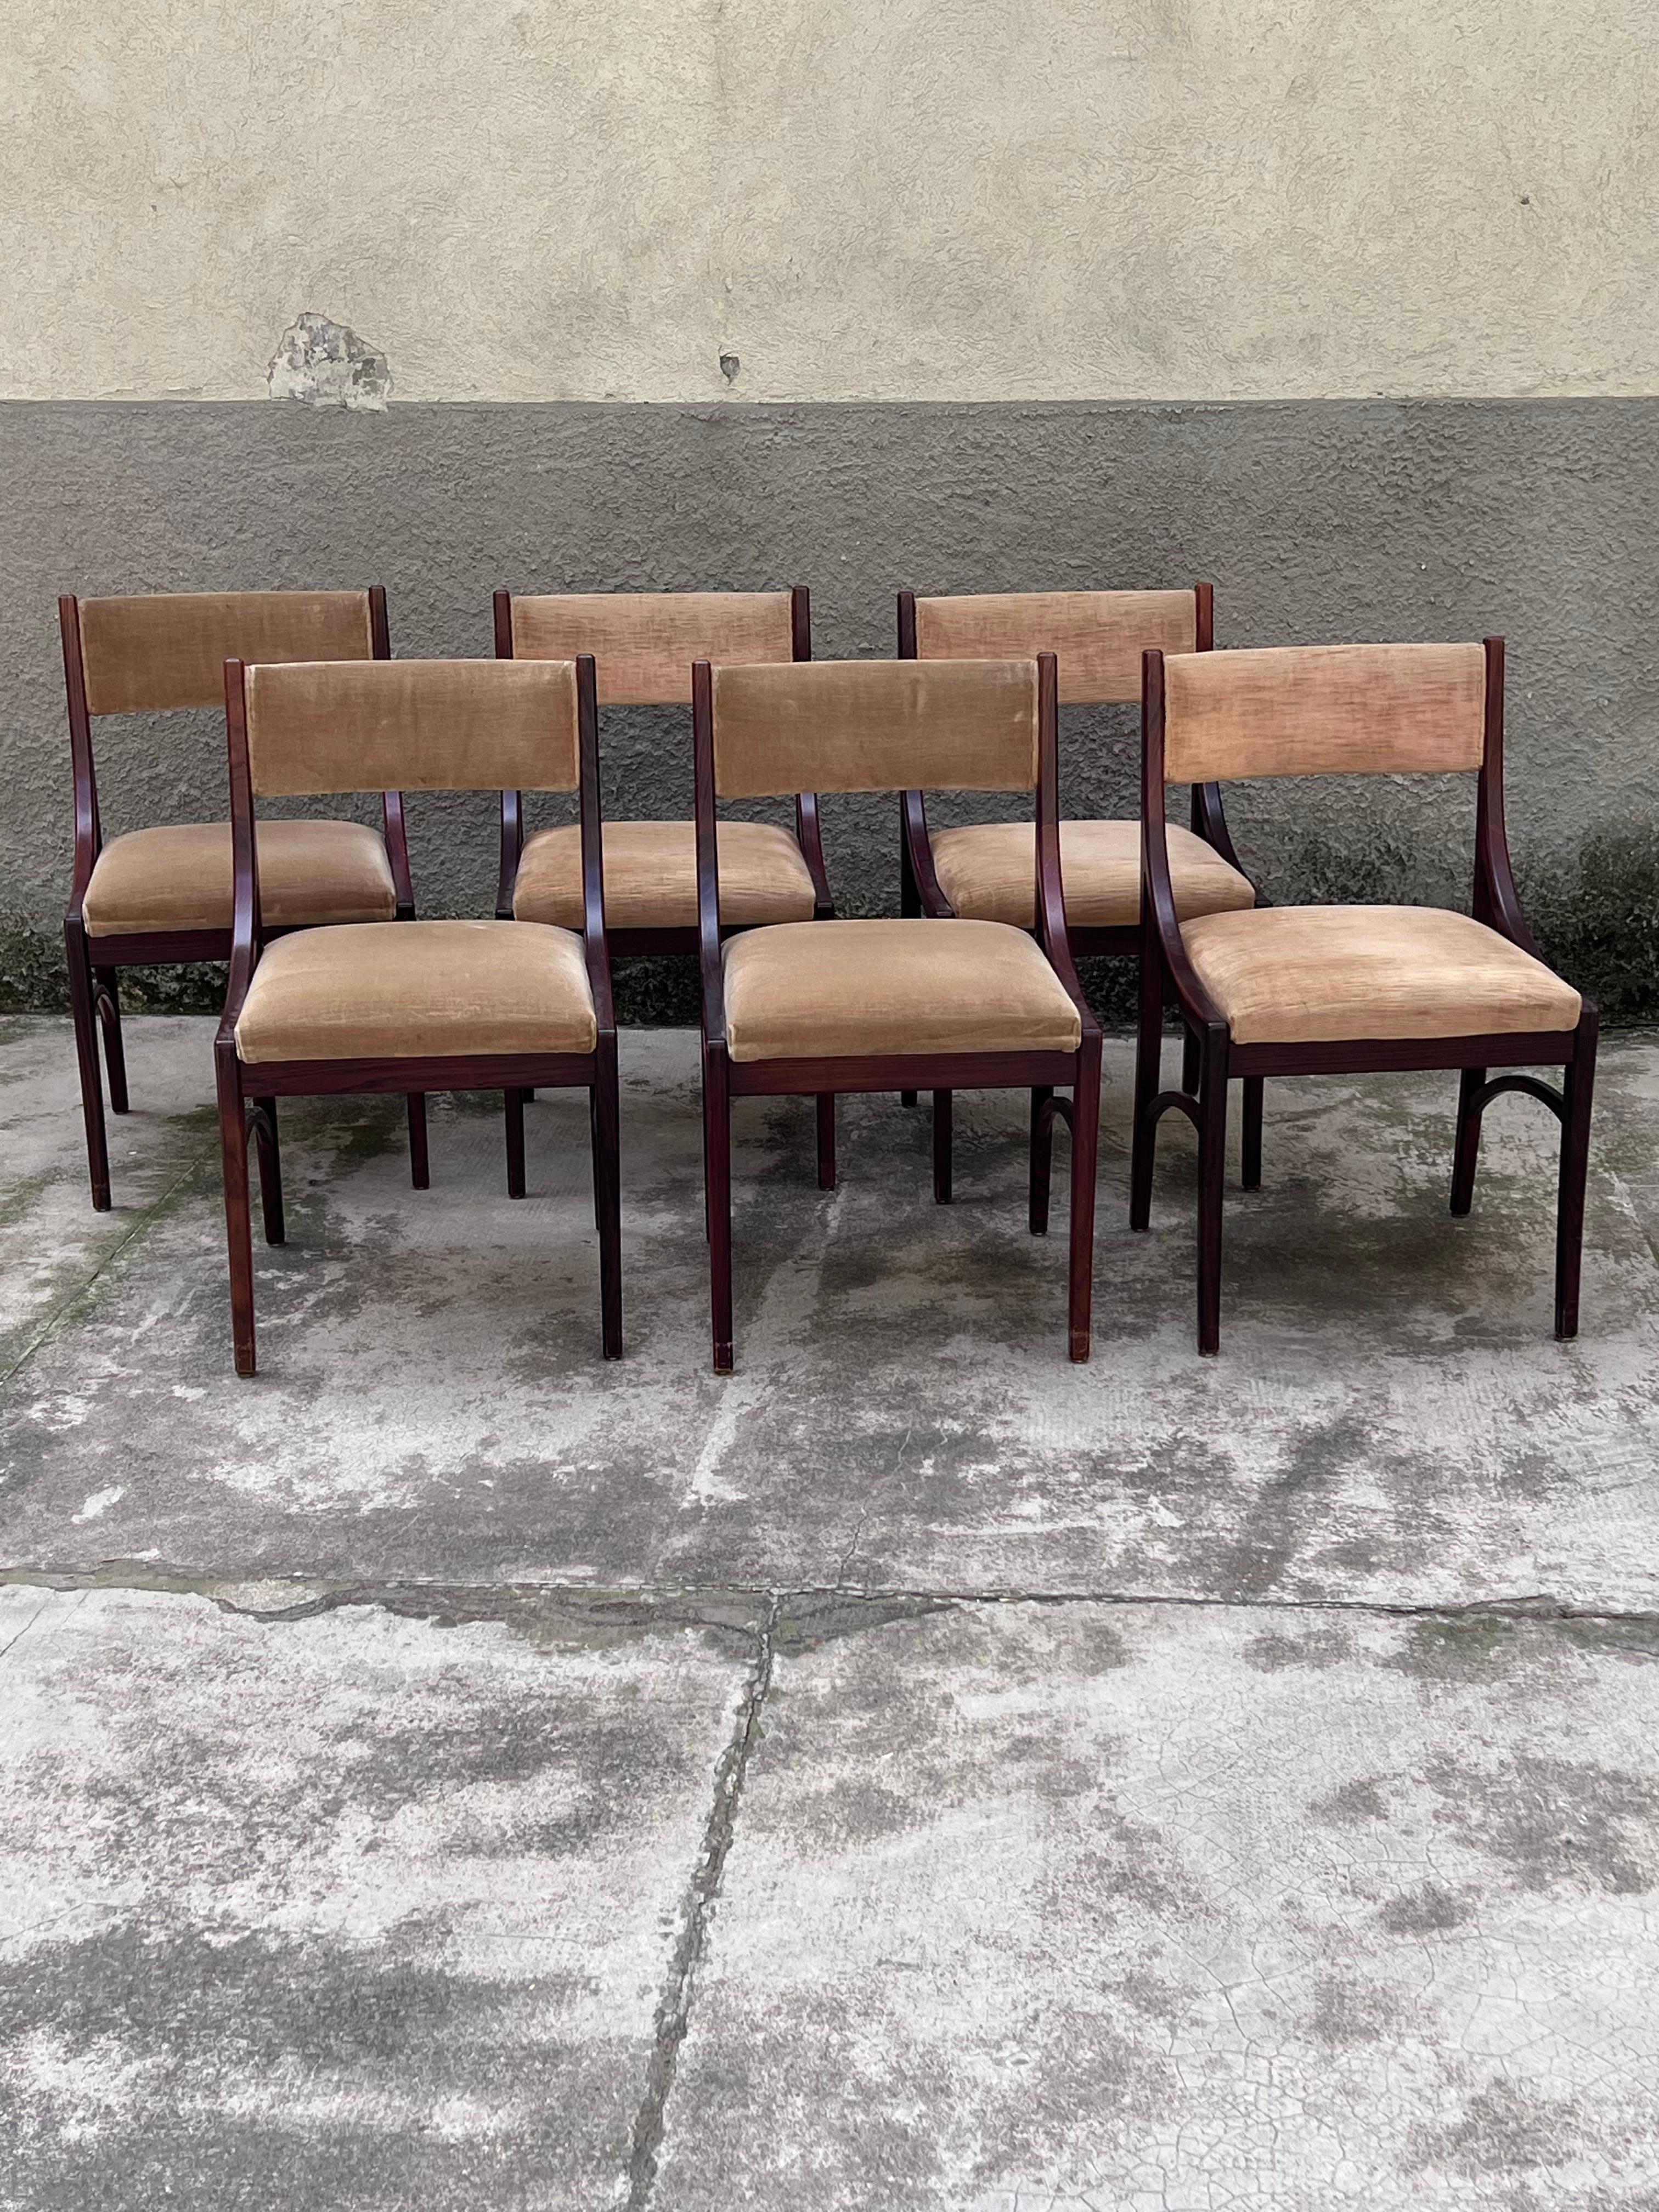 Italian Set of Six Mahogany Chairs Mod.110 by Ico Parisi for Cassina - Italy - 1960s For Sale